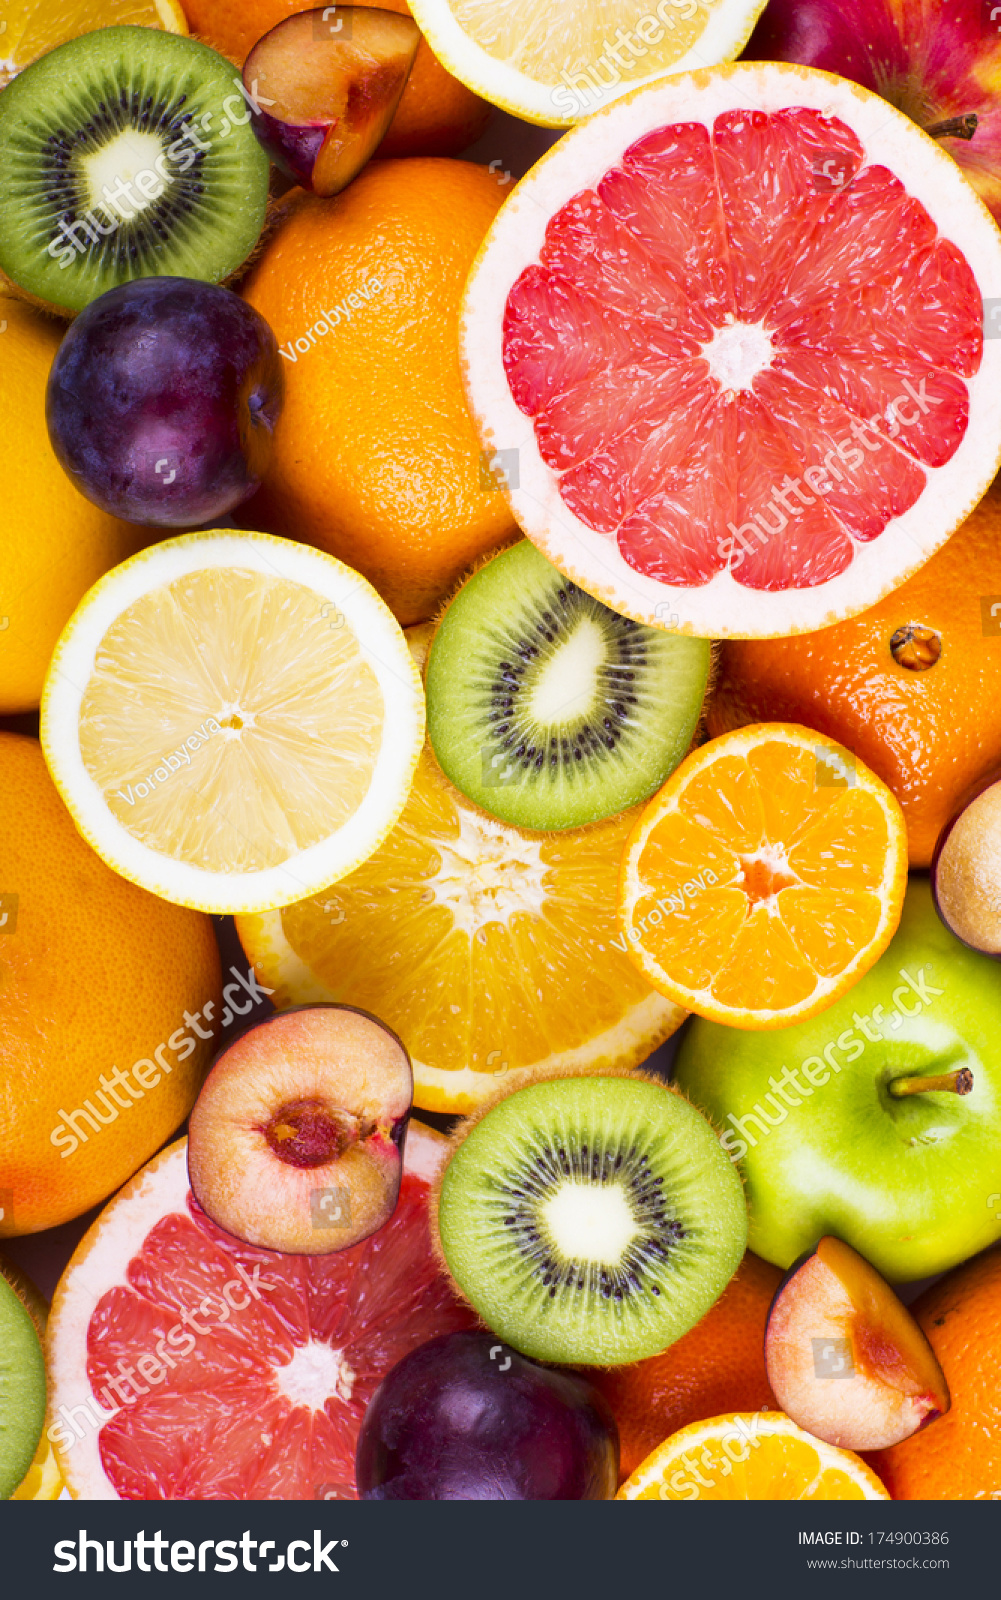 Background From Many Different Exotic Fruits Stock Photo 174900386 ...